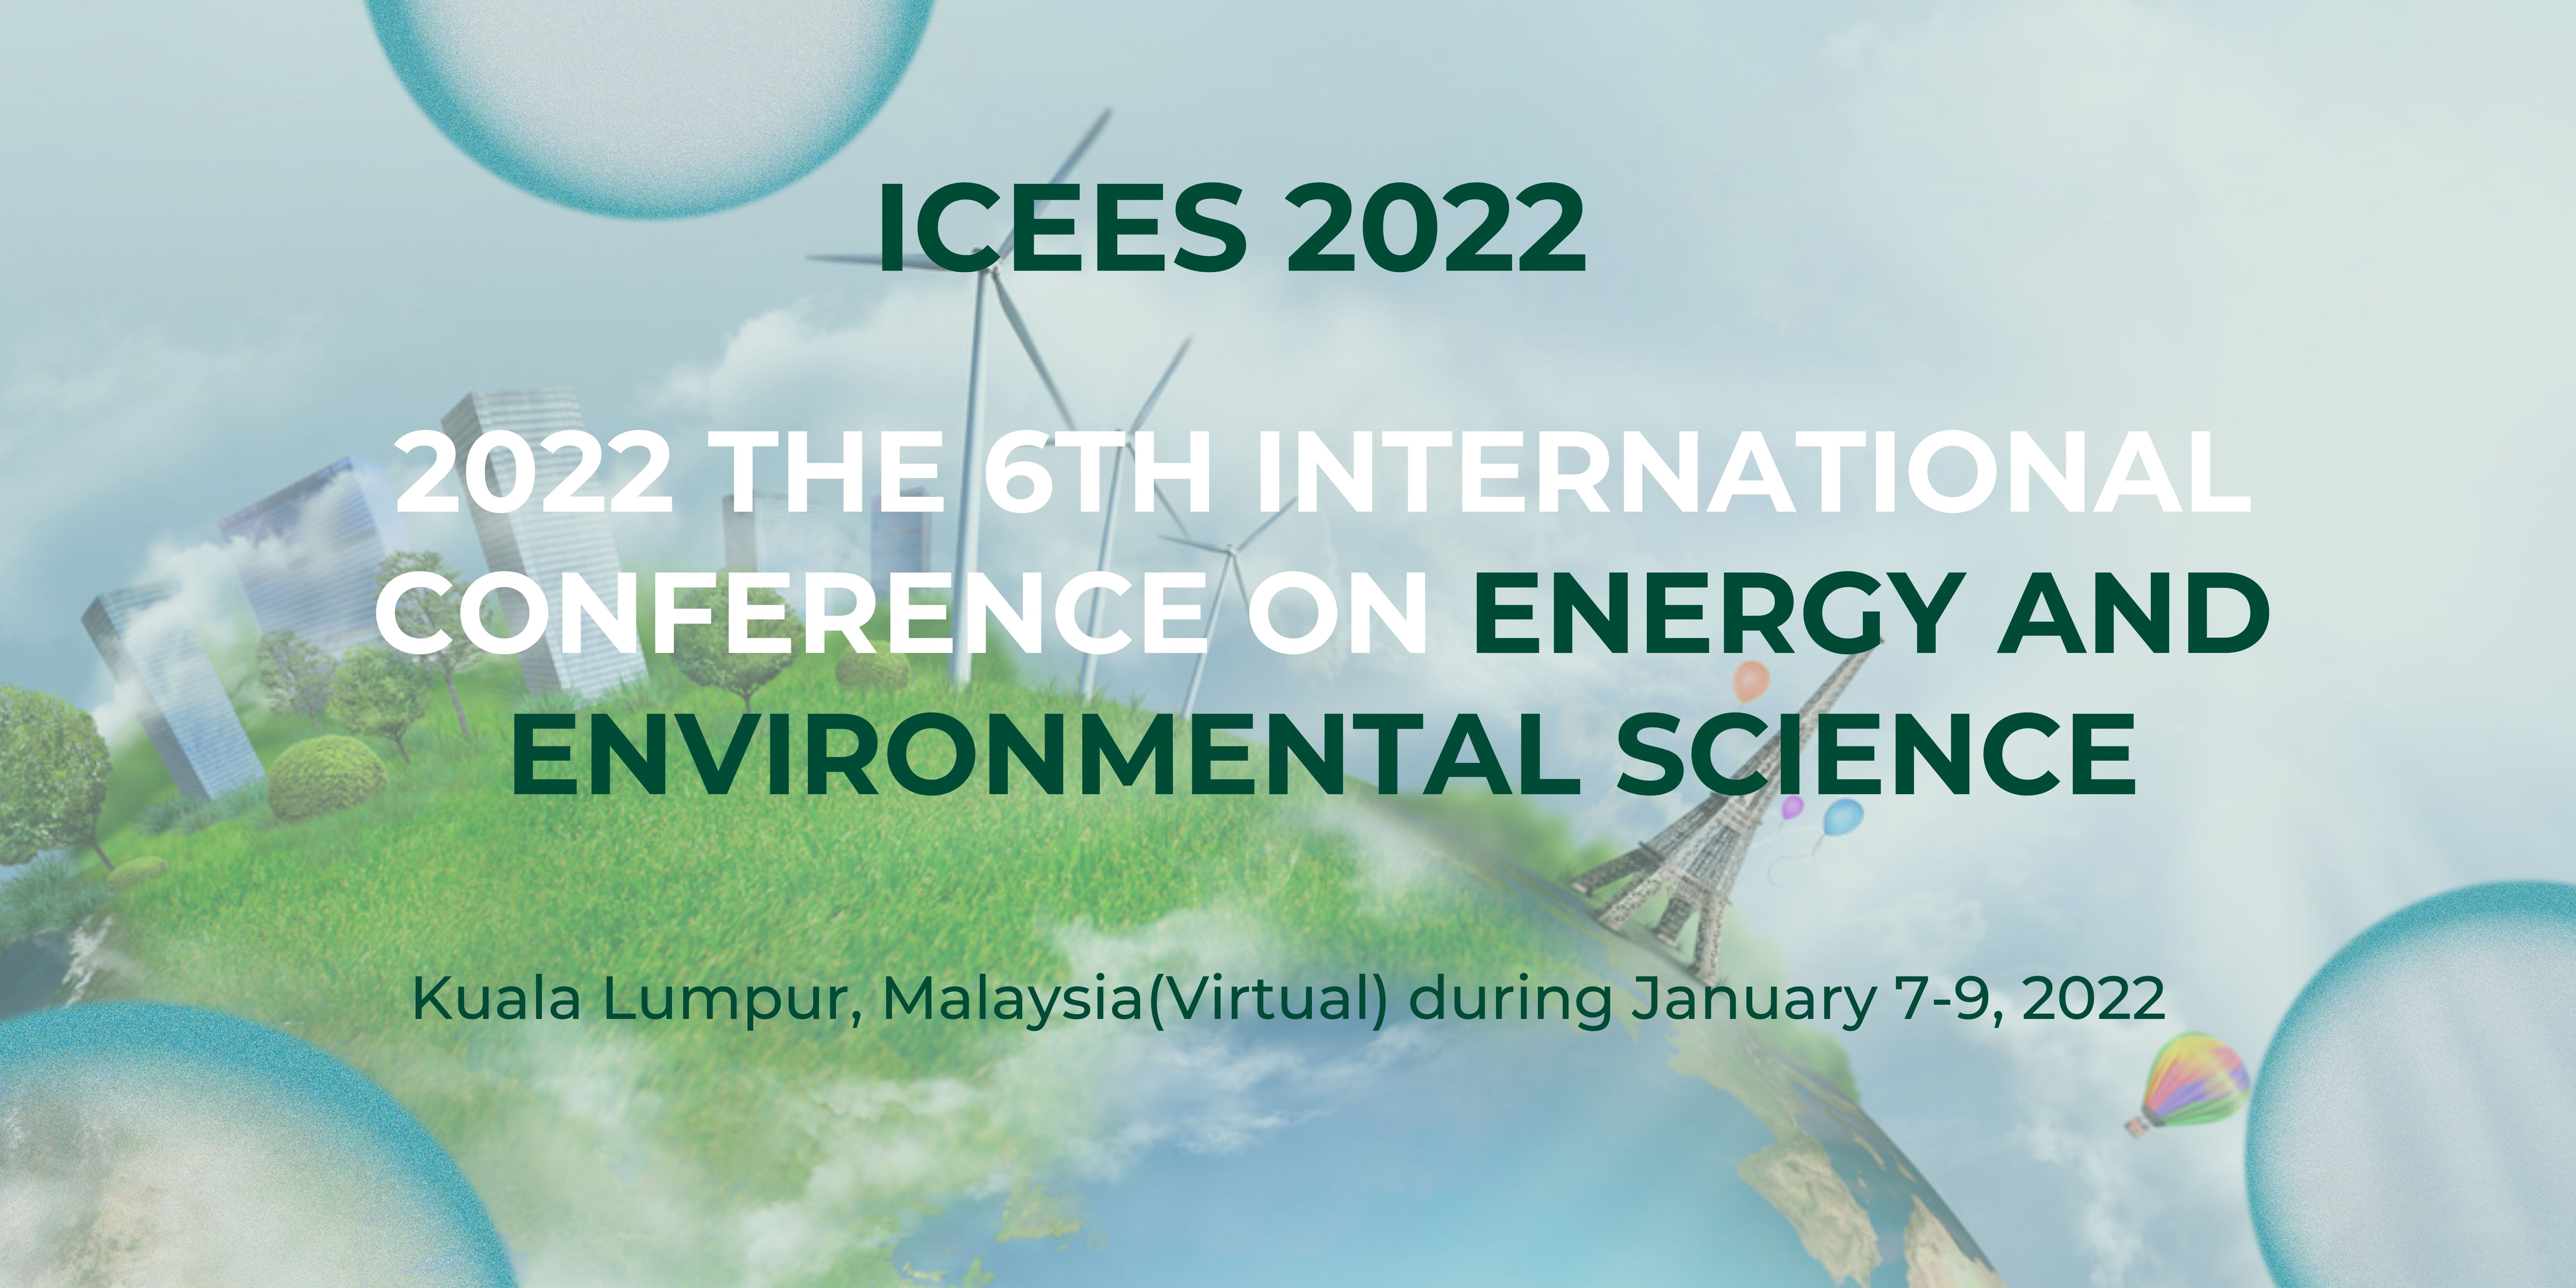 The banner to welcome you to The 6th International Conference on Energy and Environmental Science